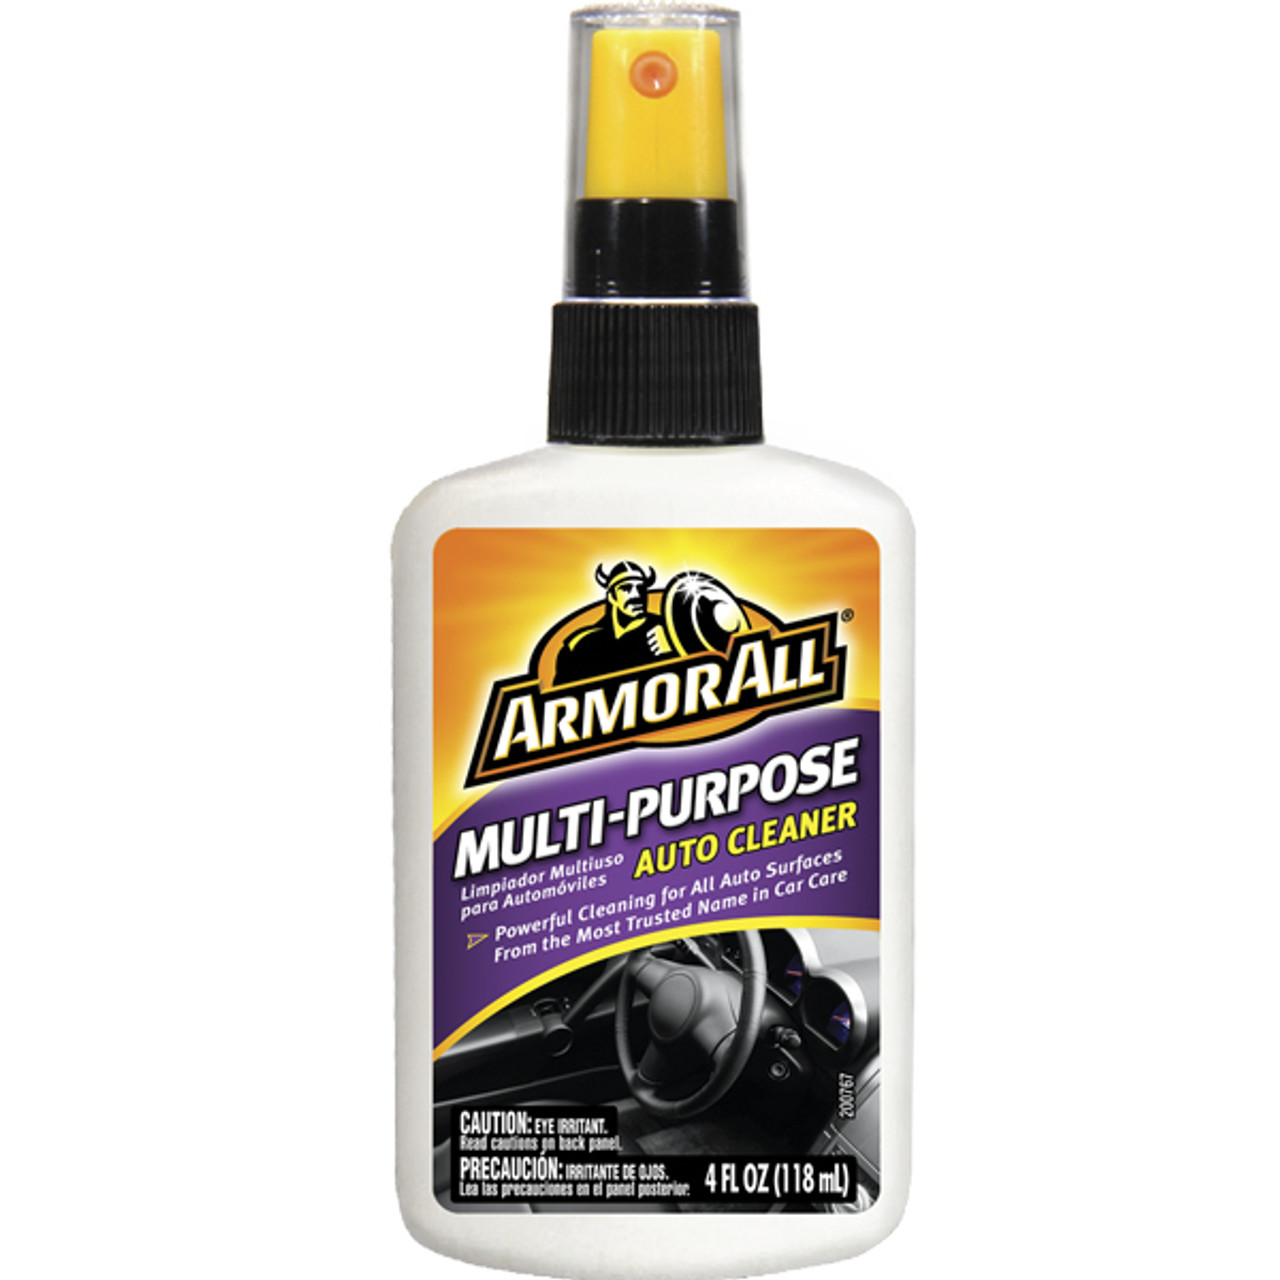 Armor All Multi Purpose Cleaner , Car Cleaner Spray for All Auto